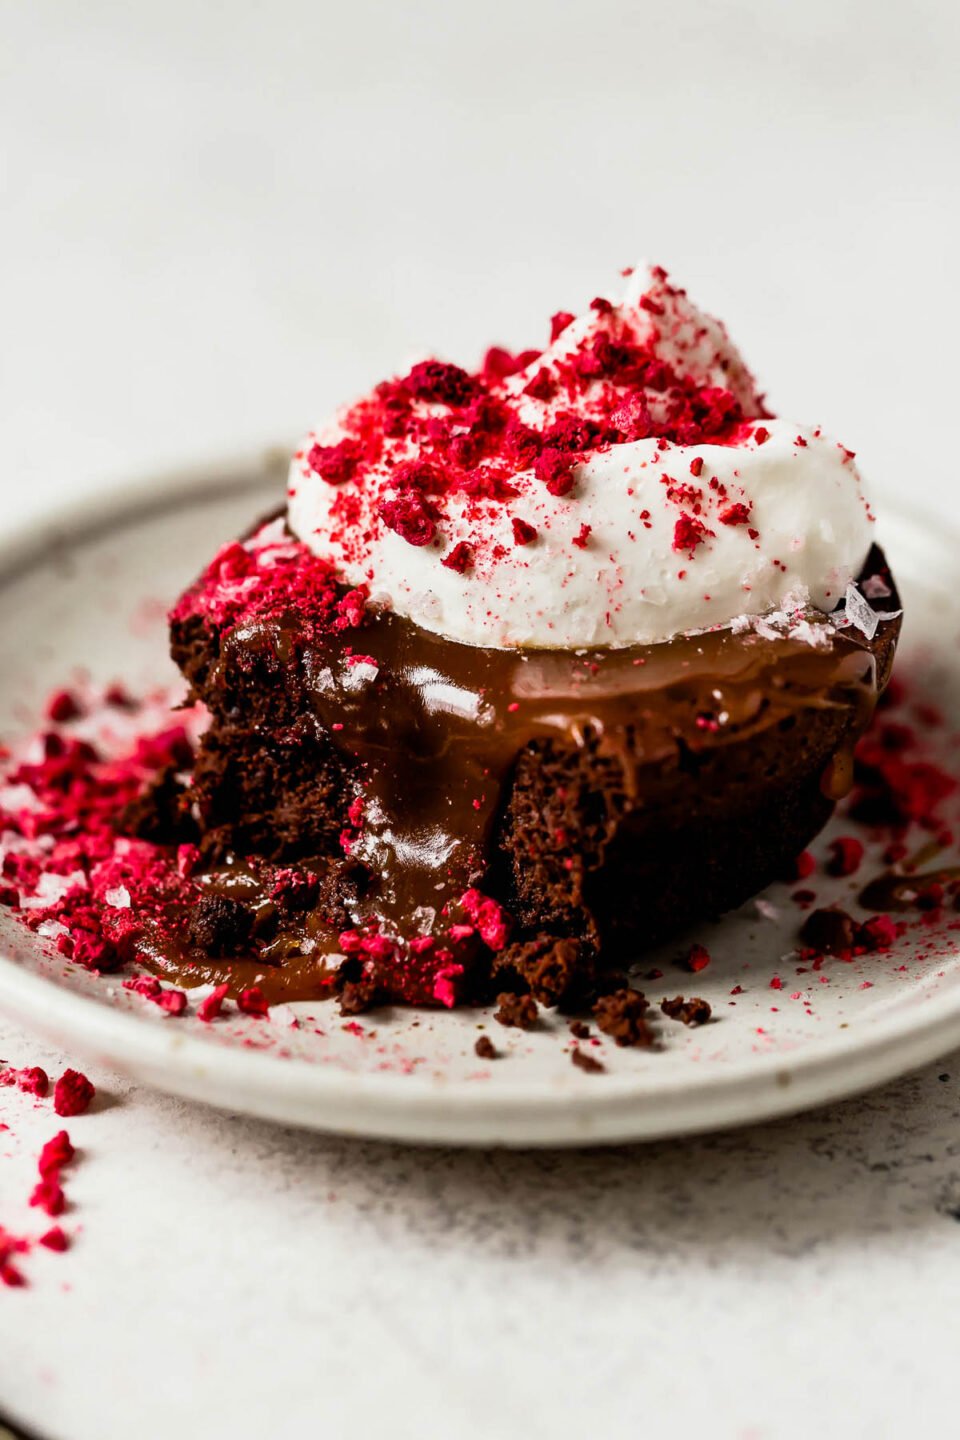 A side angle shot of a mini flourless chocolate cake that sits atop a light colored ceramic plate. The cake has been topped with caramel, whipped cream, crushed freeze-dried raspberries, and flaky sea salt. The plate sits atop a white textured surface.